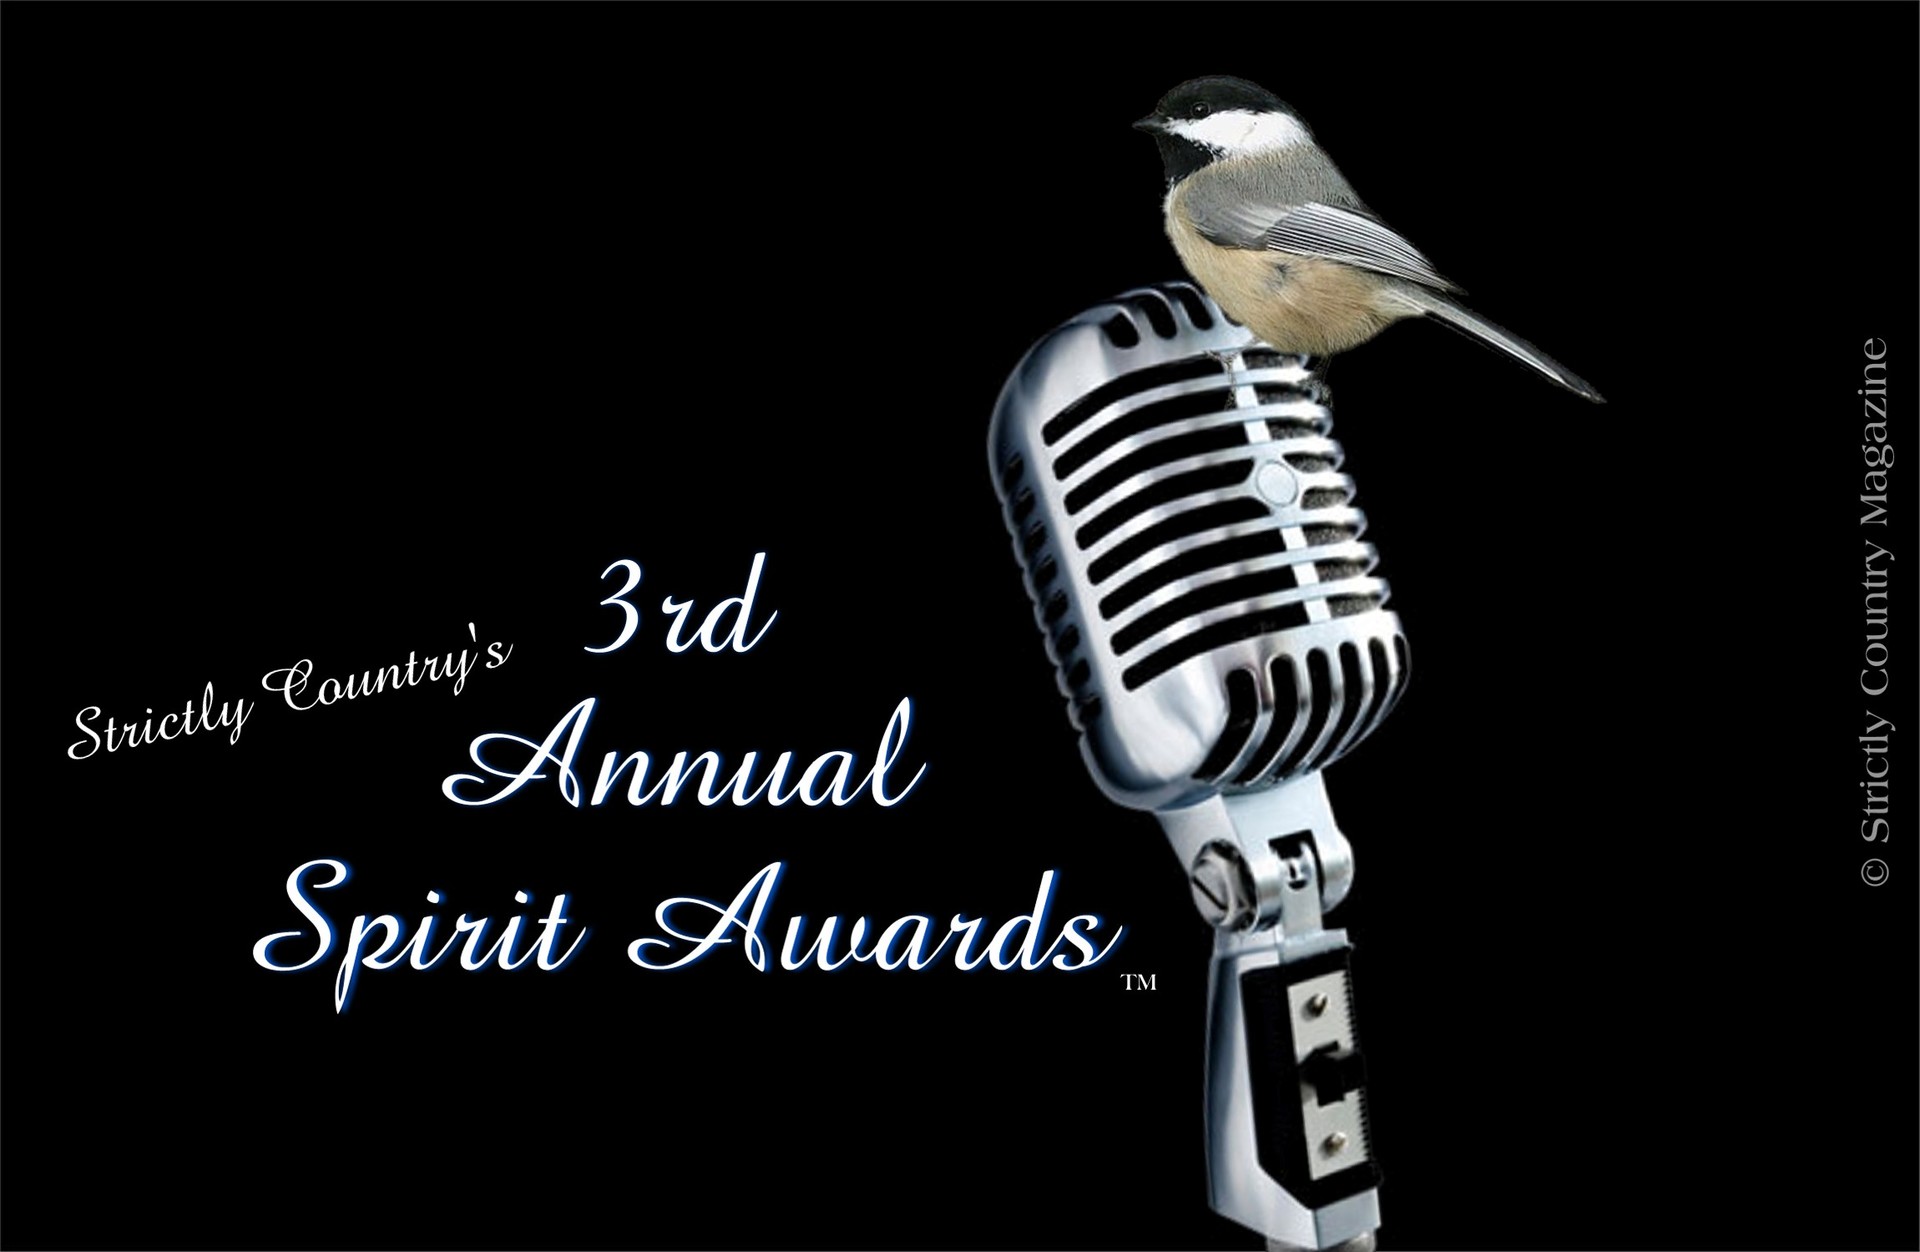 Strictly Country Magazine copyright 3rd Annual Spirit Awards official logo